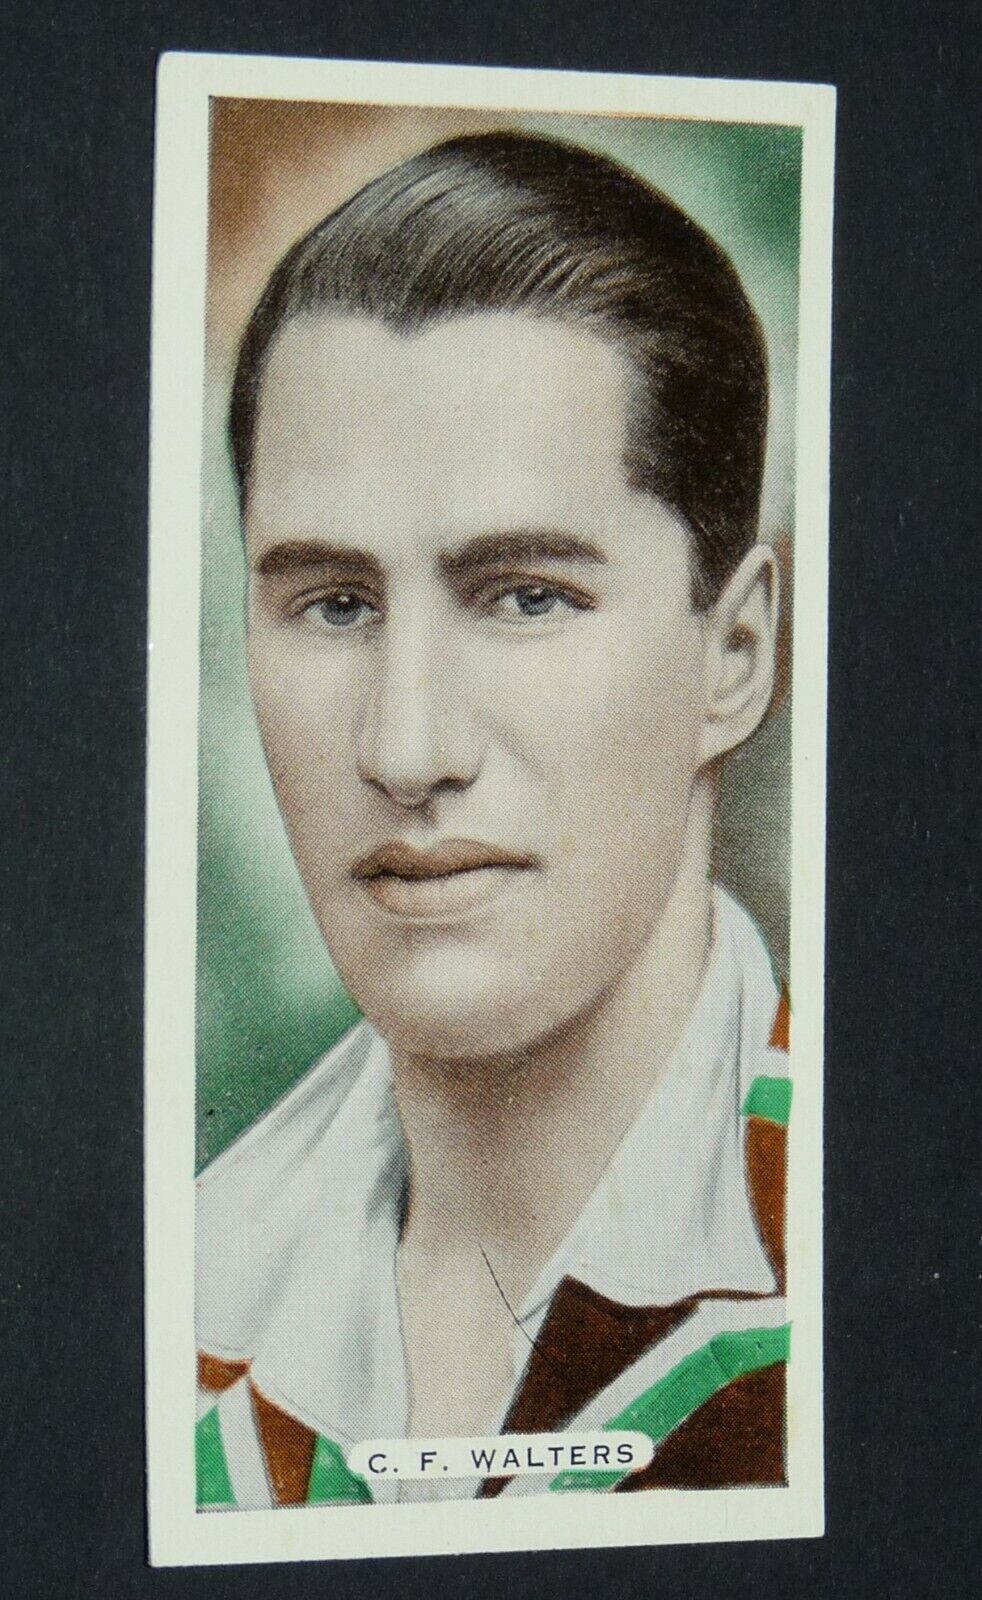 1935 ARDATH CIGARETTES CARD CRICKET CELEBRITIES #3 C.F. WALTERS WORCESTERSHIRE